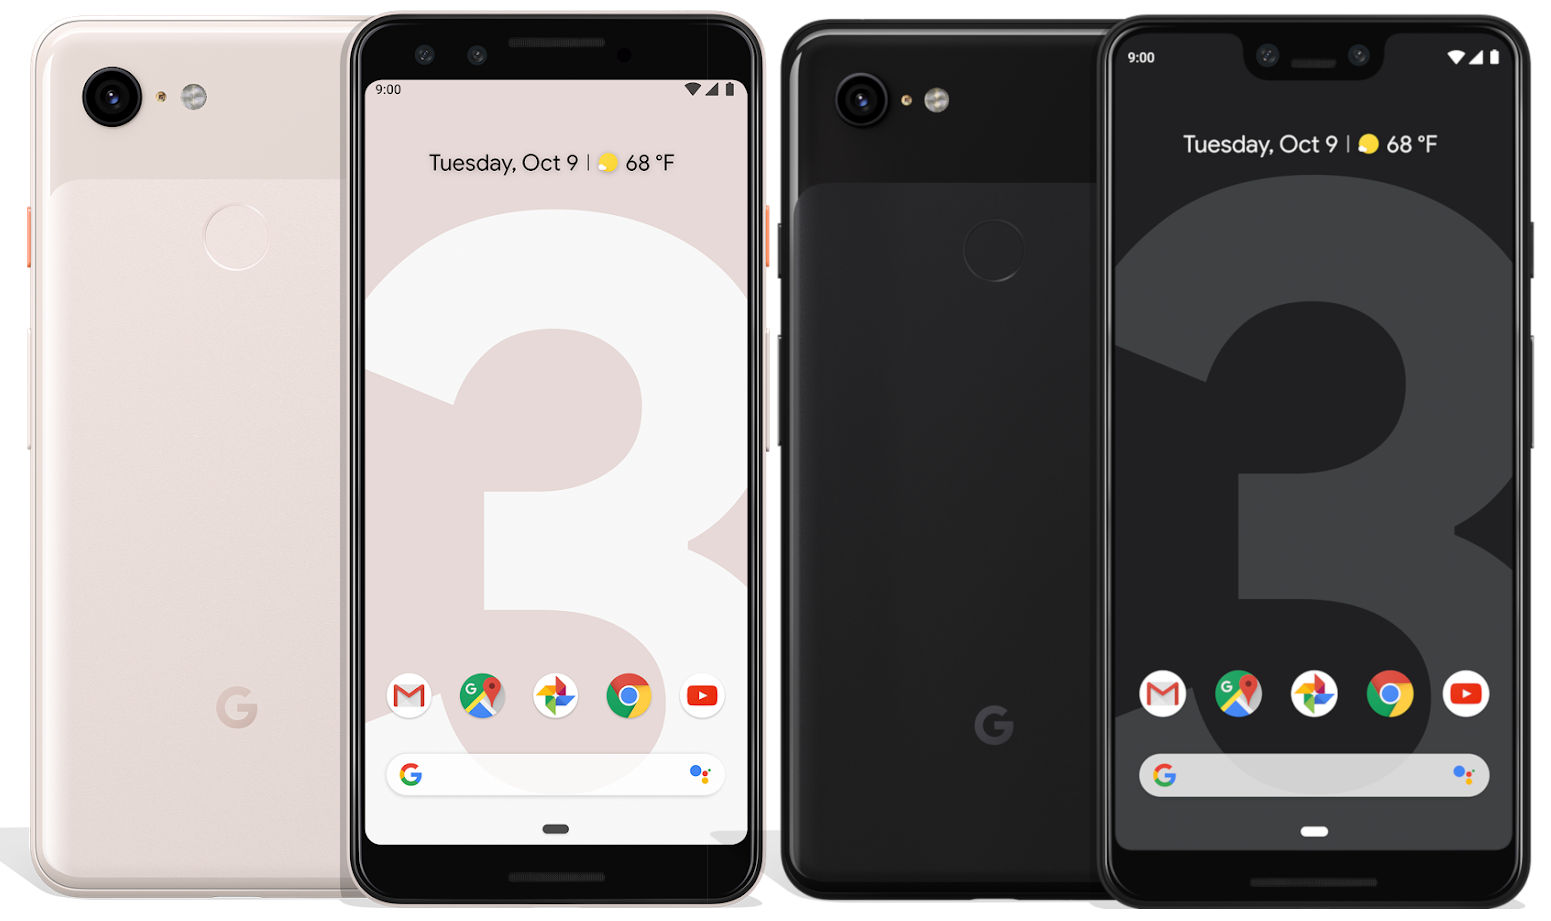 Google Pixel 3 and Pixel 3 XL with 5.5-inch FHD+ and 6.3-inch QHD+